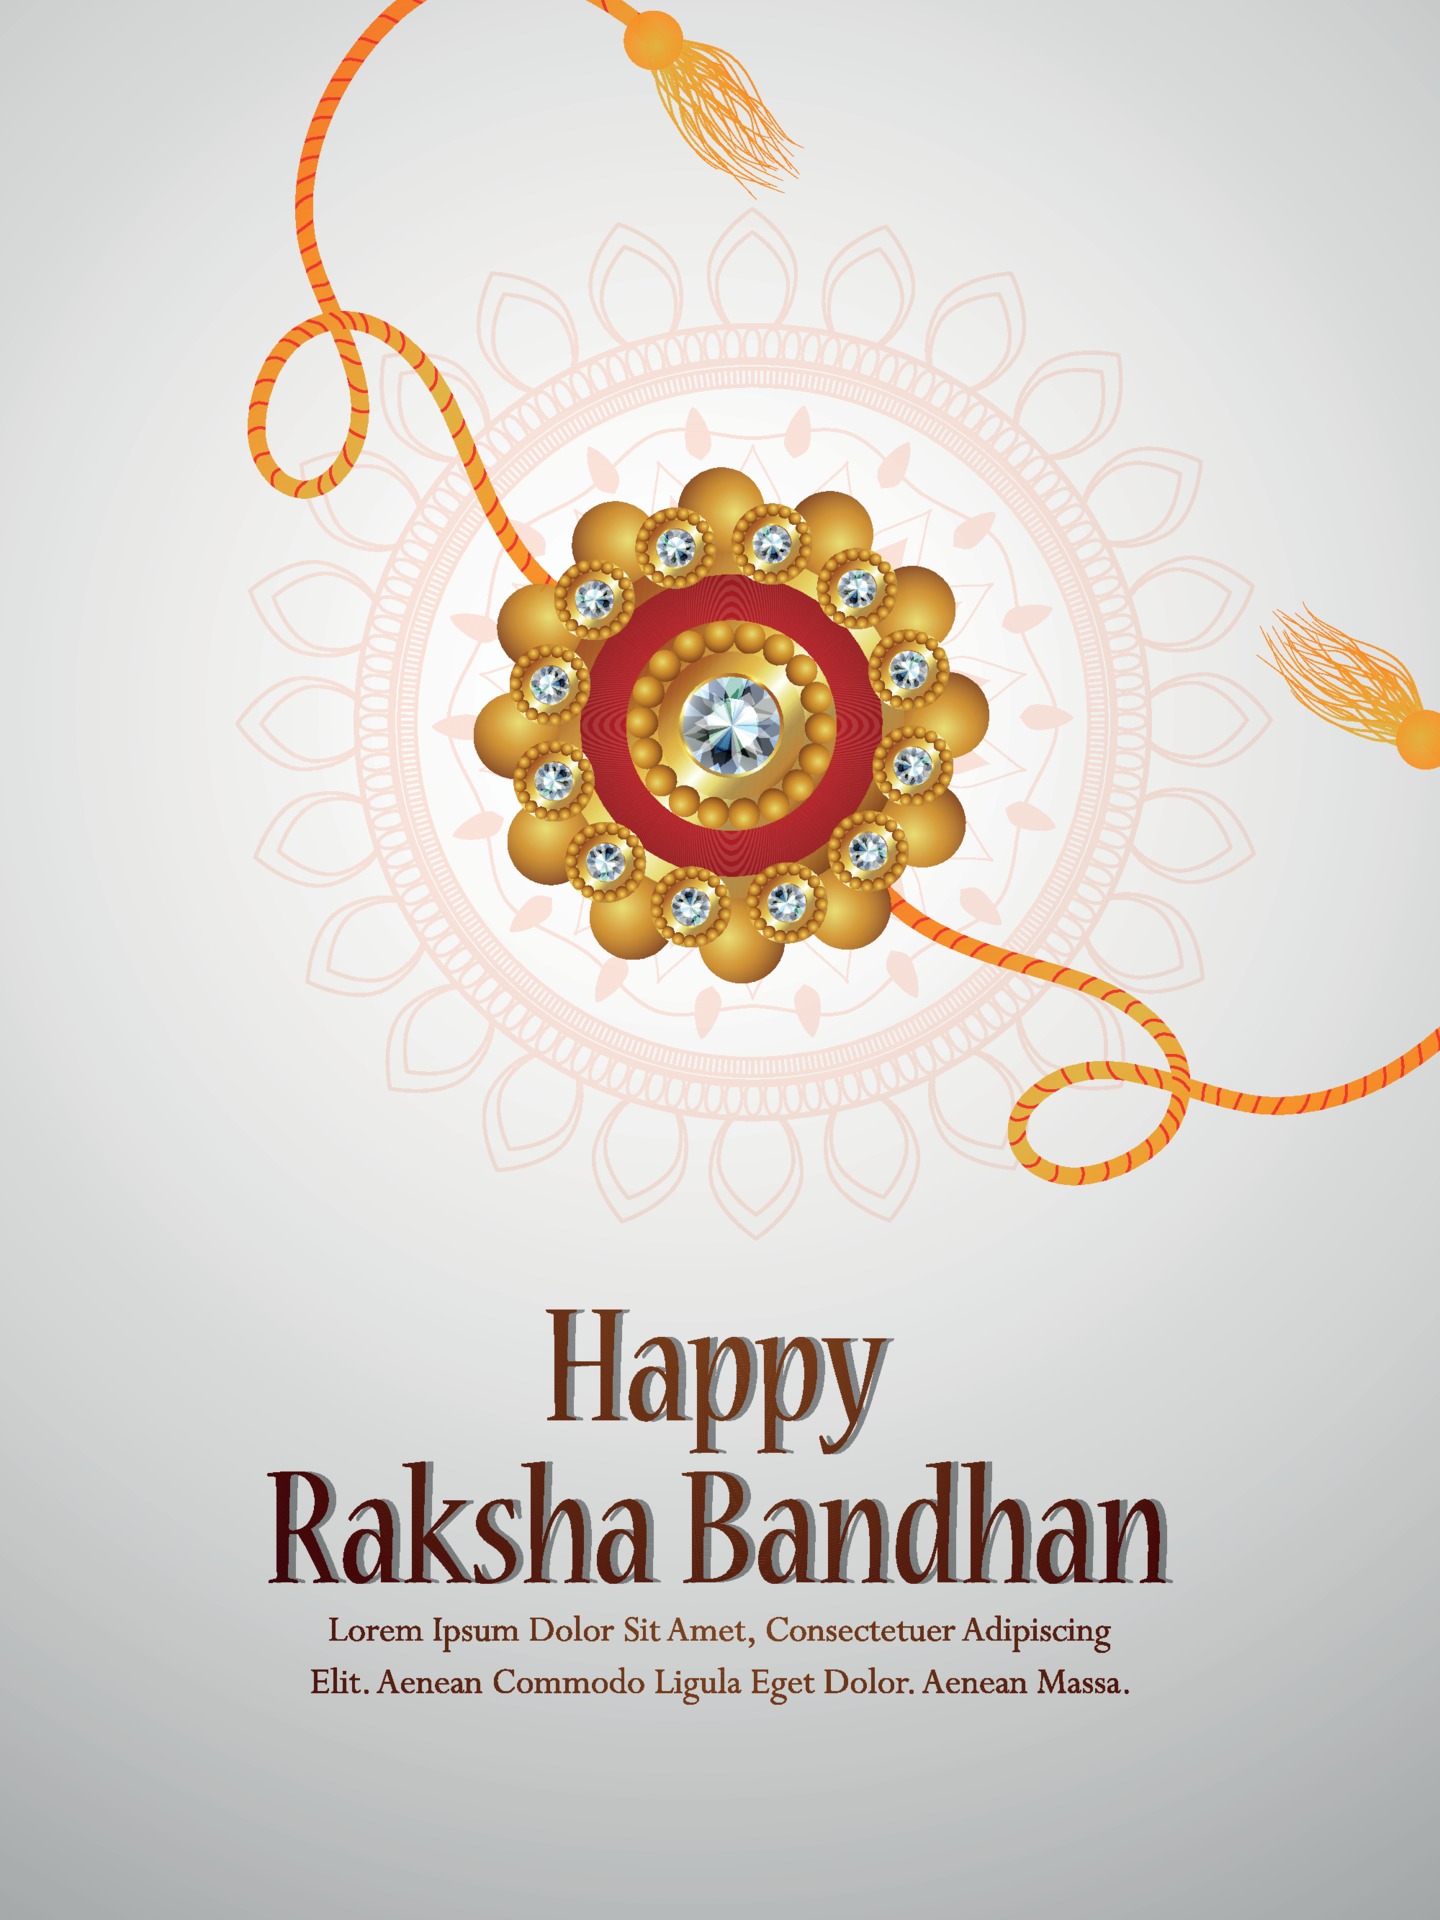 Happy raksha bandhan festival greeting background design posters for the  wall  posters protection ceremony knot  myloviewcom